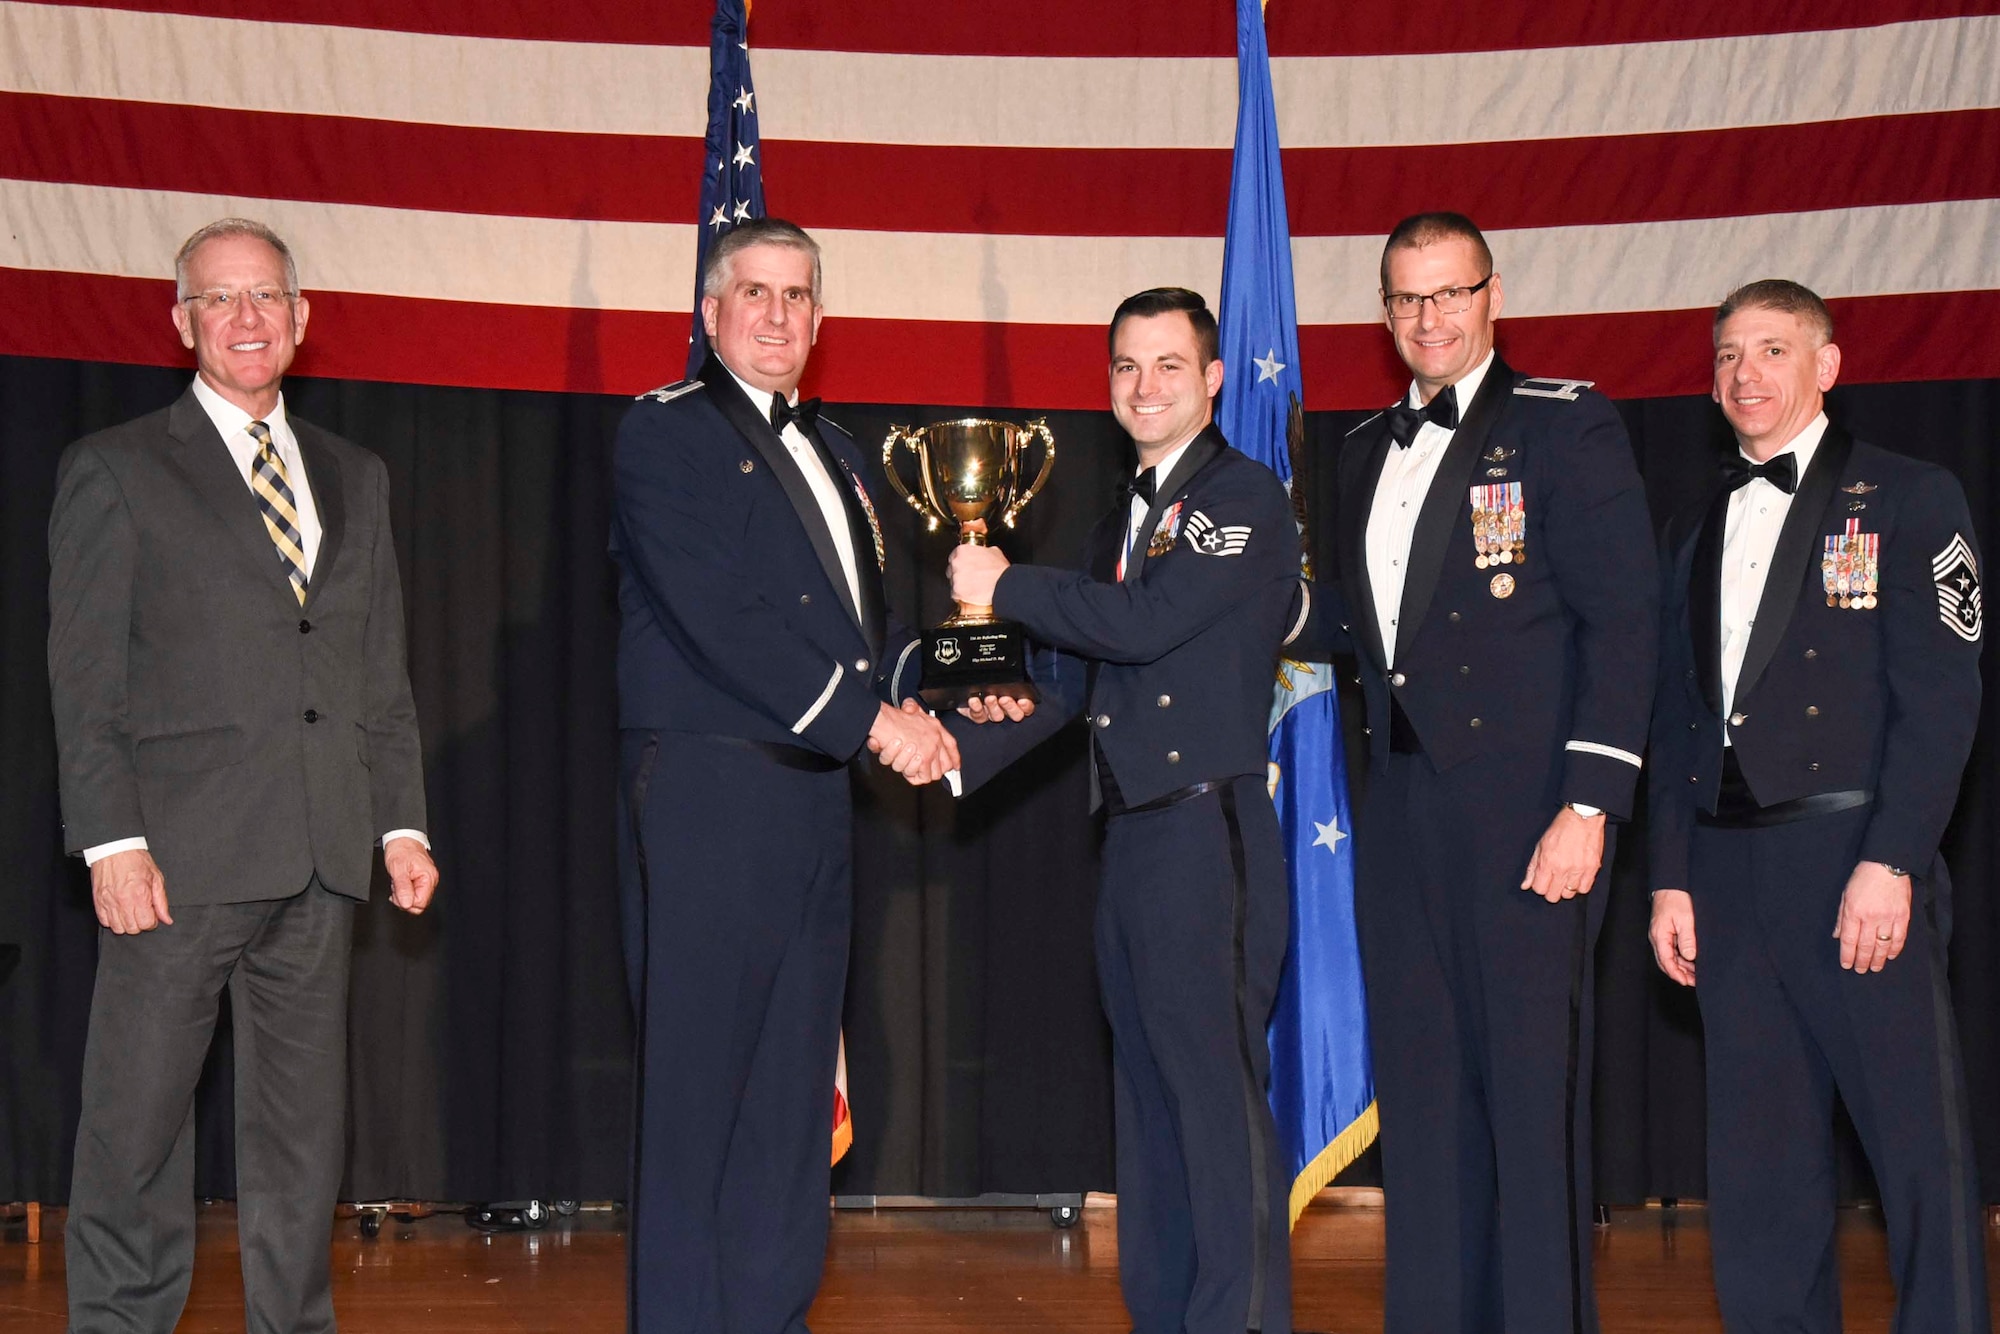 Staff Sgt. Michael D. Ruff, 22nd Security Forces Squadron, center, accepts the 2016 Innovator of the Year award, Feb. 3, 2017, at McConnell Air Force Base, Kan. The annual awards ceremony recognized military and civilian members who excel in their areas of responsibilities, leadership qualities, community involvement, self-improvement and innovation during the period of January to December 2016. (U.S. Air Force photo/Senior Airman Christopher Thornbury)